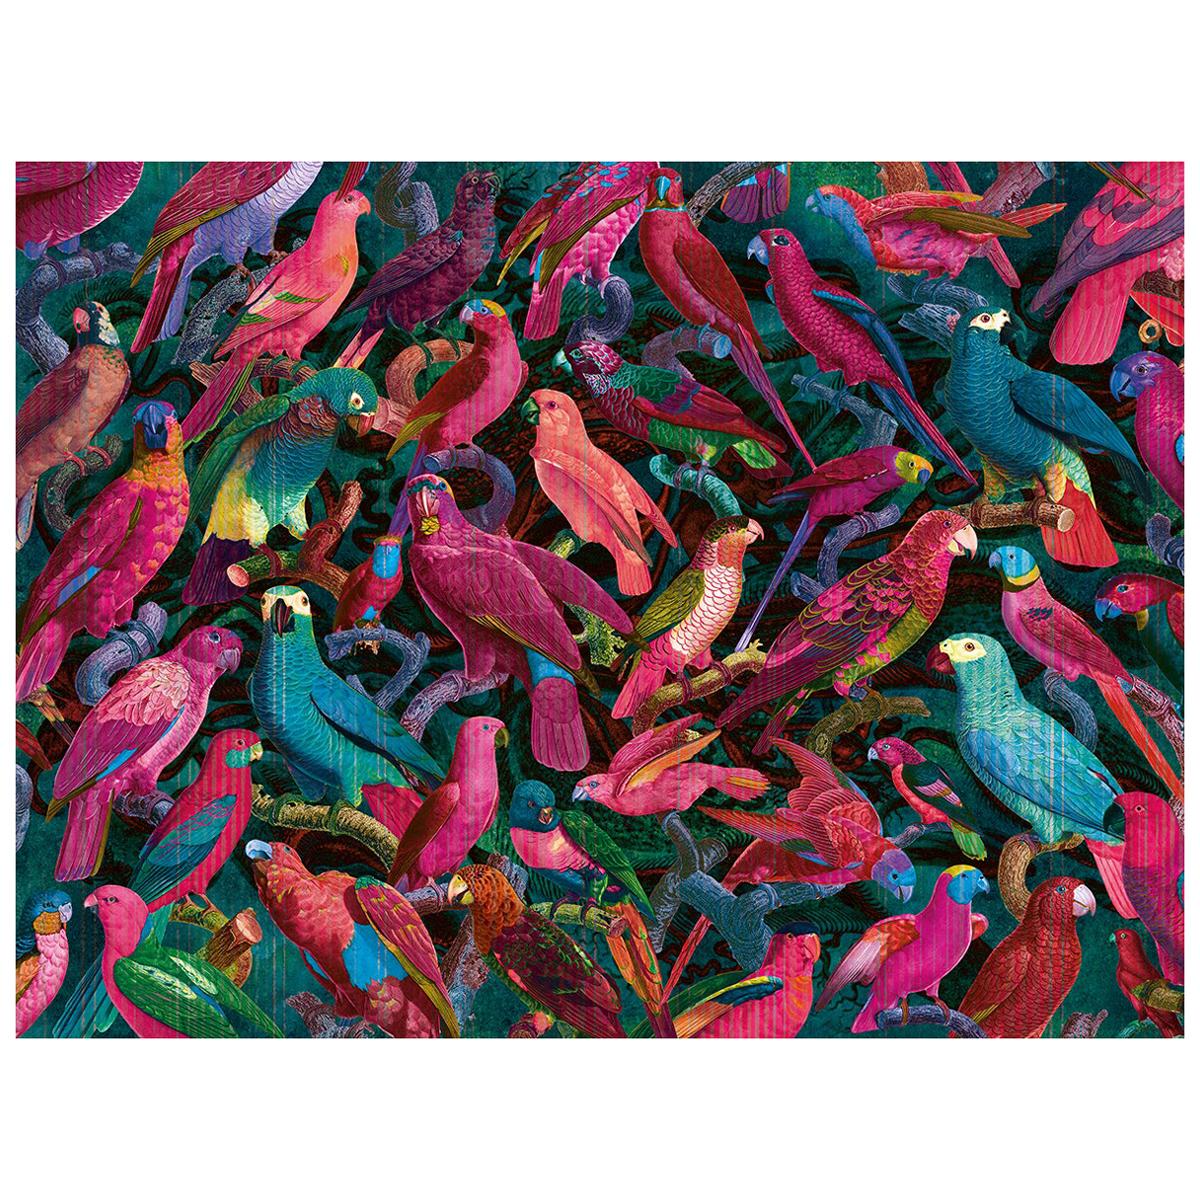 Parrot Imperialis - custom mural wallpaper (fuchsia and blue) For Sale